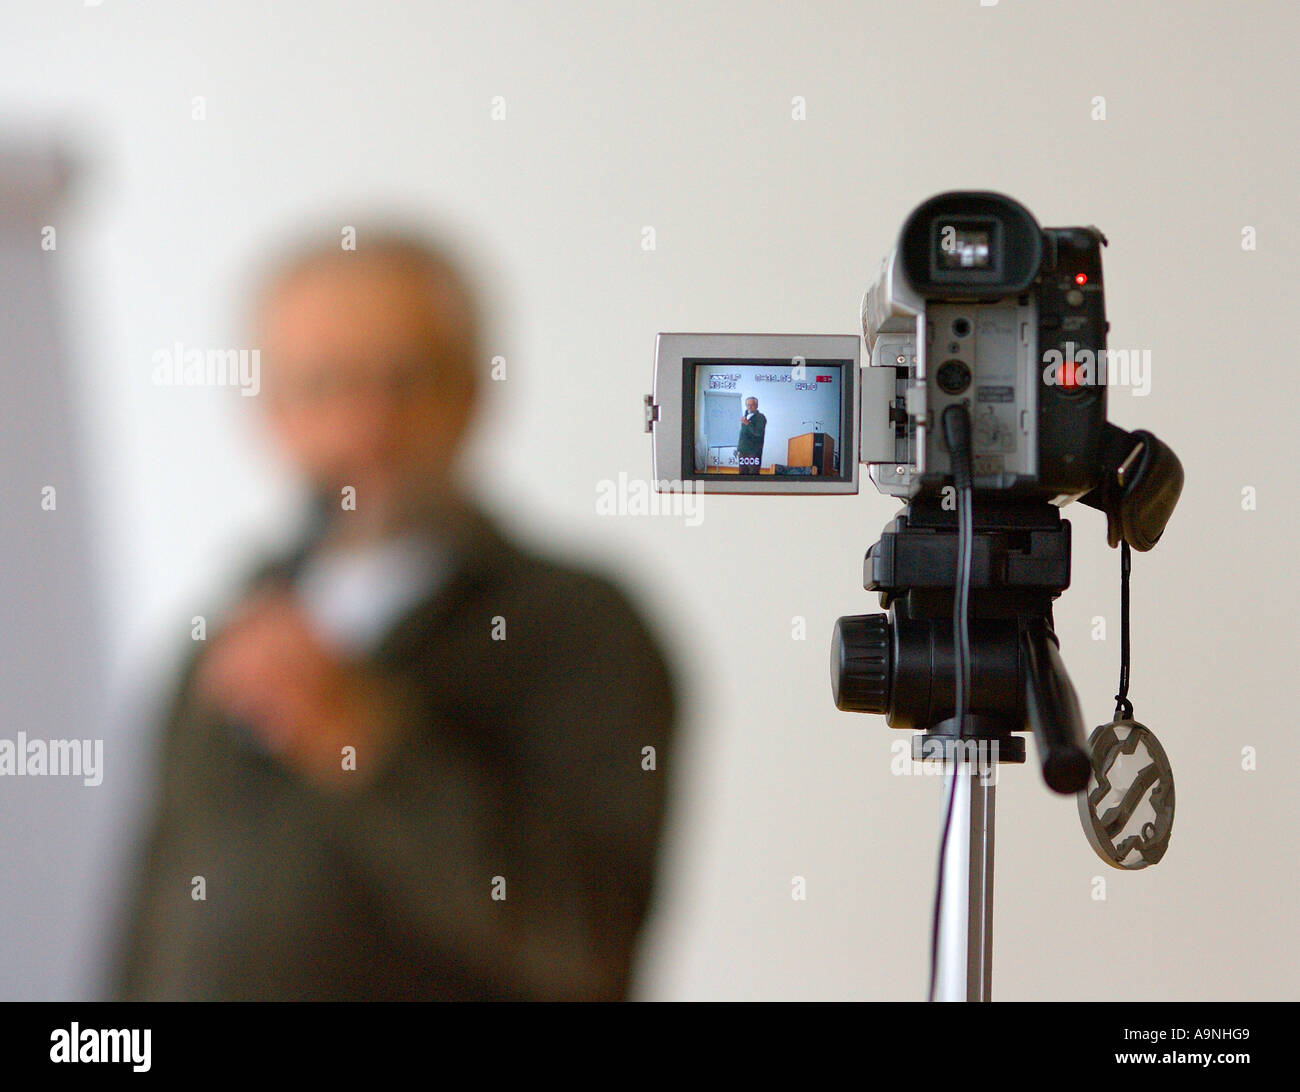 A video camera focused on a speaker at a conference in Germany Stock Photo